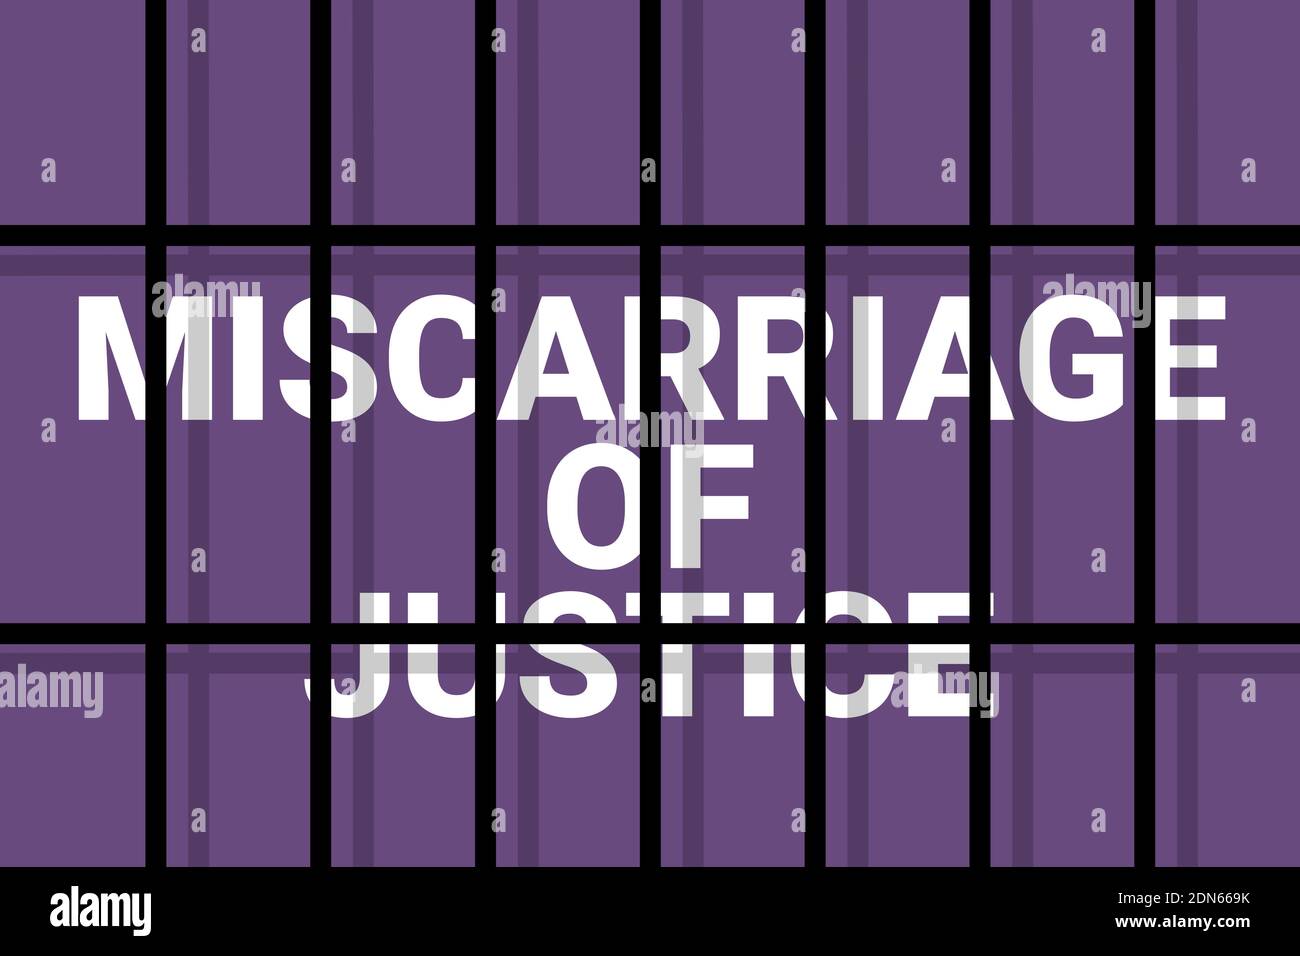 miscarriage-of-justice-failure-of-justice-prisoner-is-accused-sentenced-and-convicted-based-on-judicial-failure-error-mistake-fault-and-incorr-2DN669K.jpg